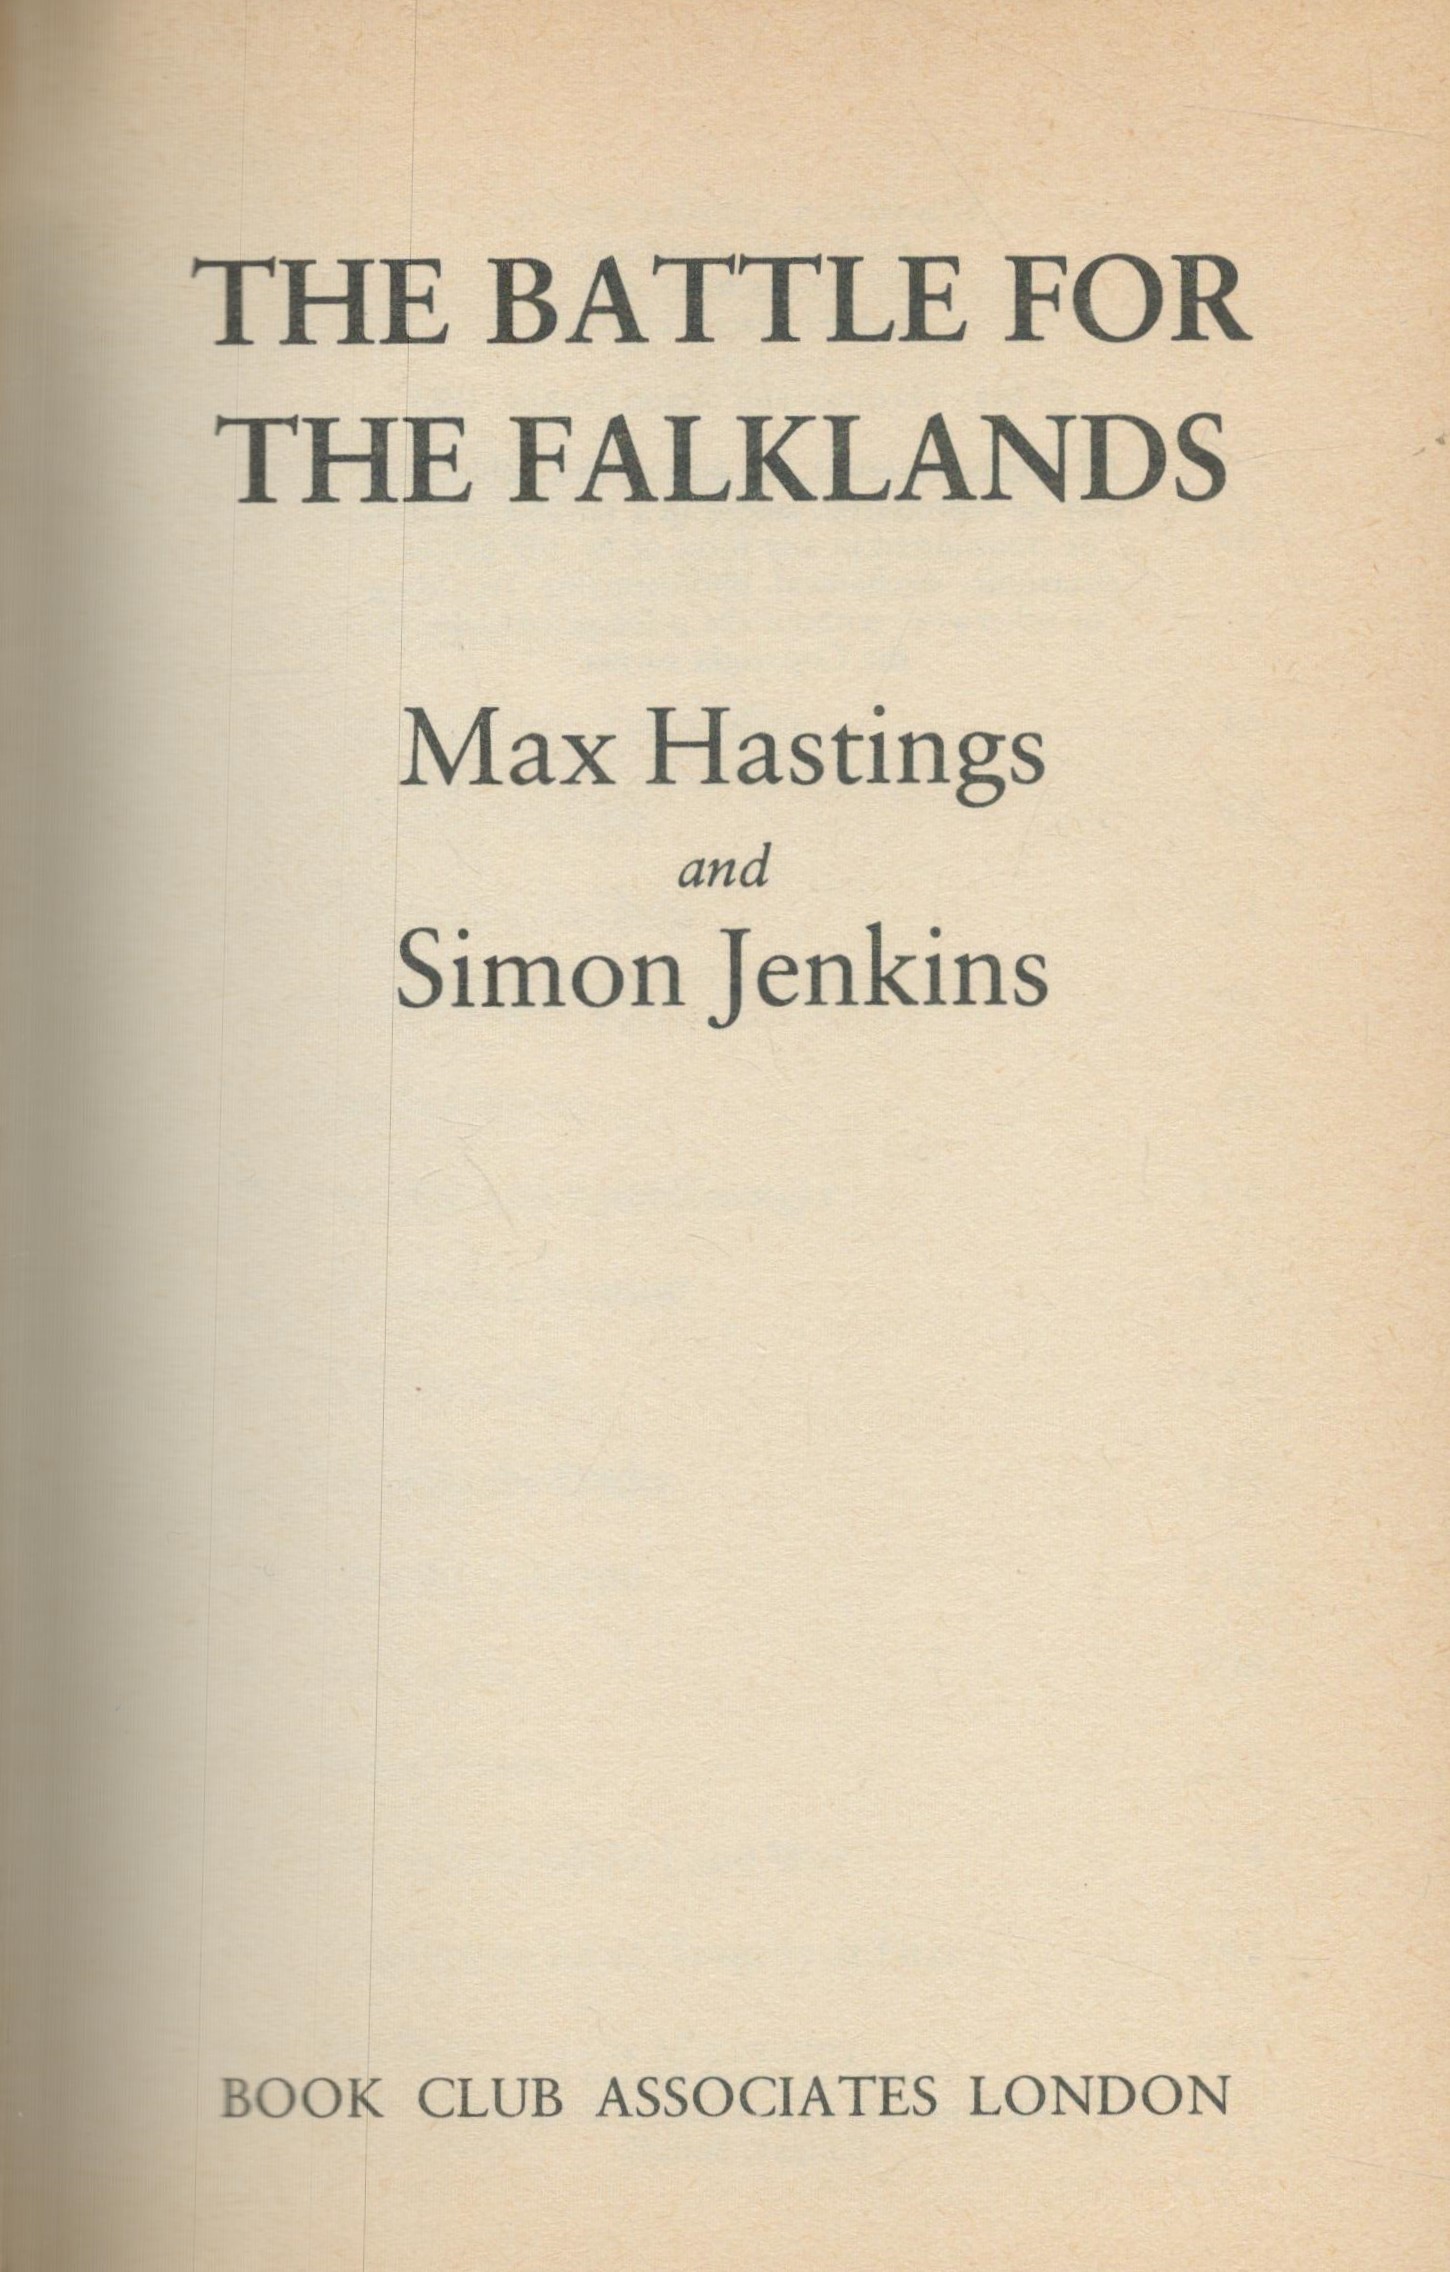 The Battle for the Falklands by Max Hastings & Simon Jenkins 1983 Book Club Edition Hardback Book - Image 5 of 9